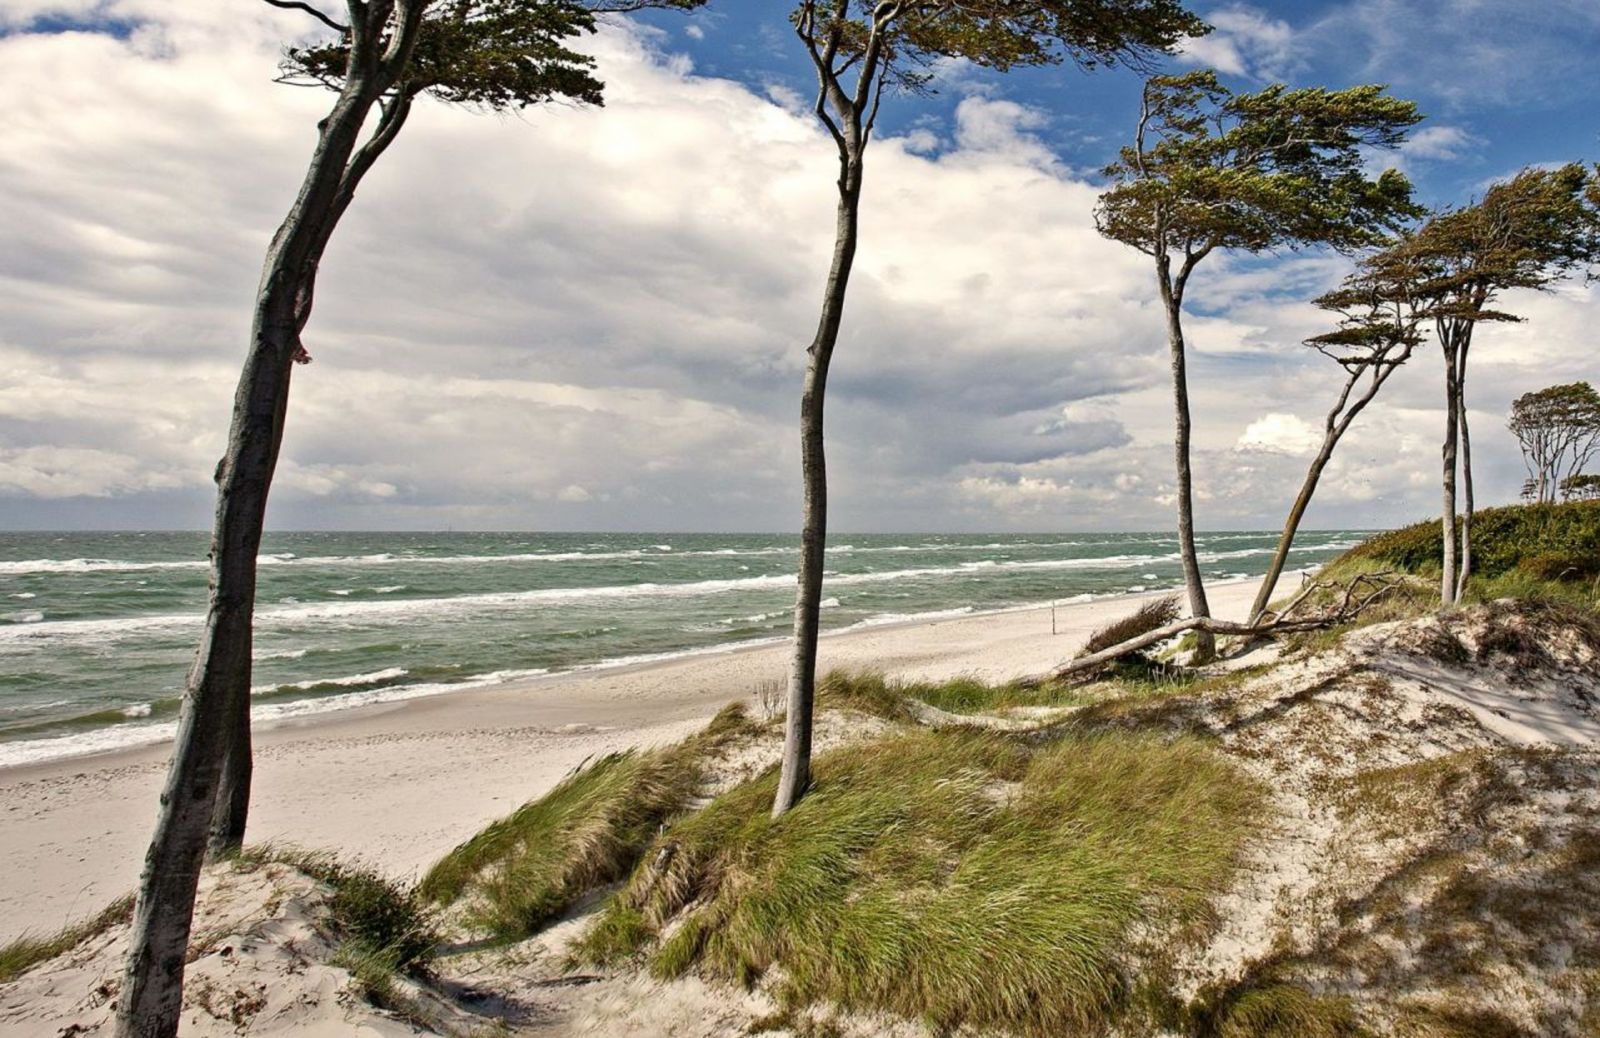 The Baltic coastline of Germany is wild, wonderful and full of nature to explore including thathced cottages of Ostseebad.